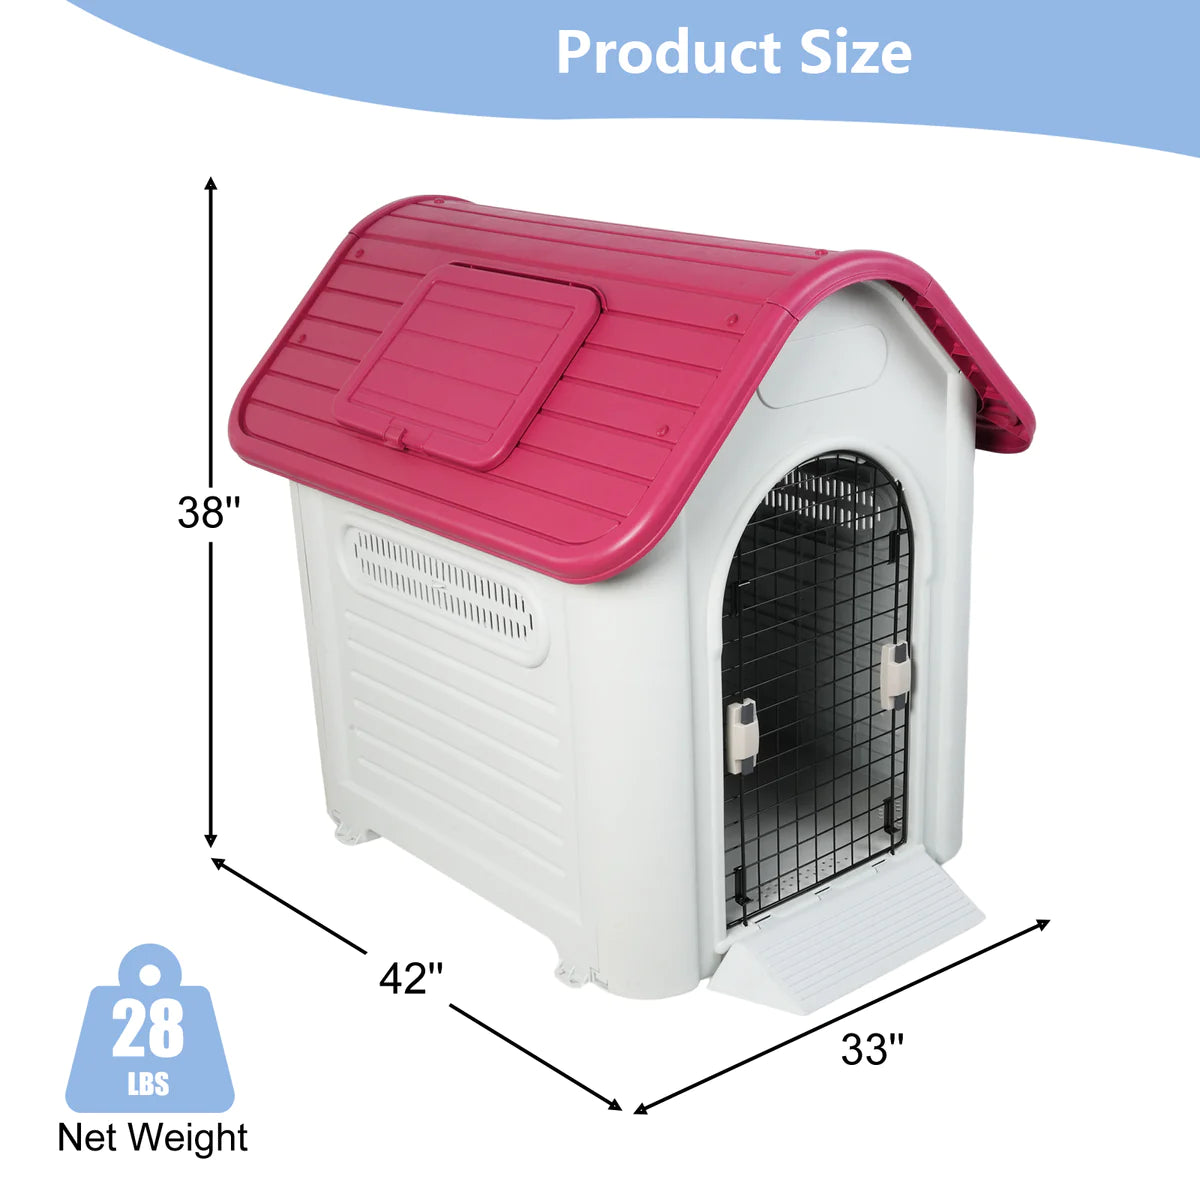 Outdoor Dog Houses Plastic Kennel with Mesh Iron Door and Air Vents, Red Proof